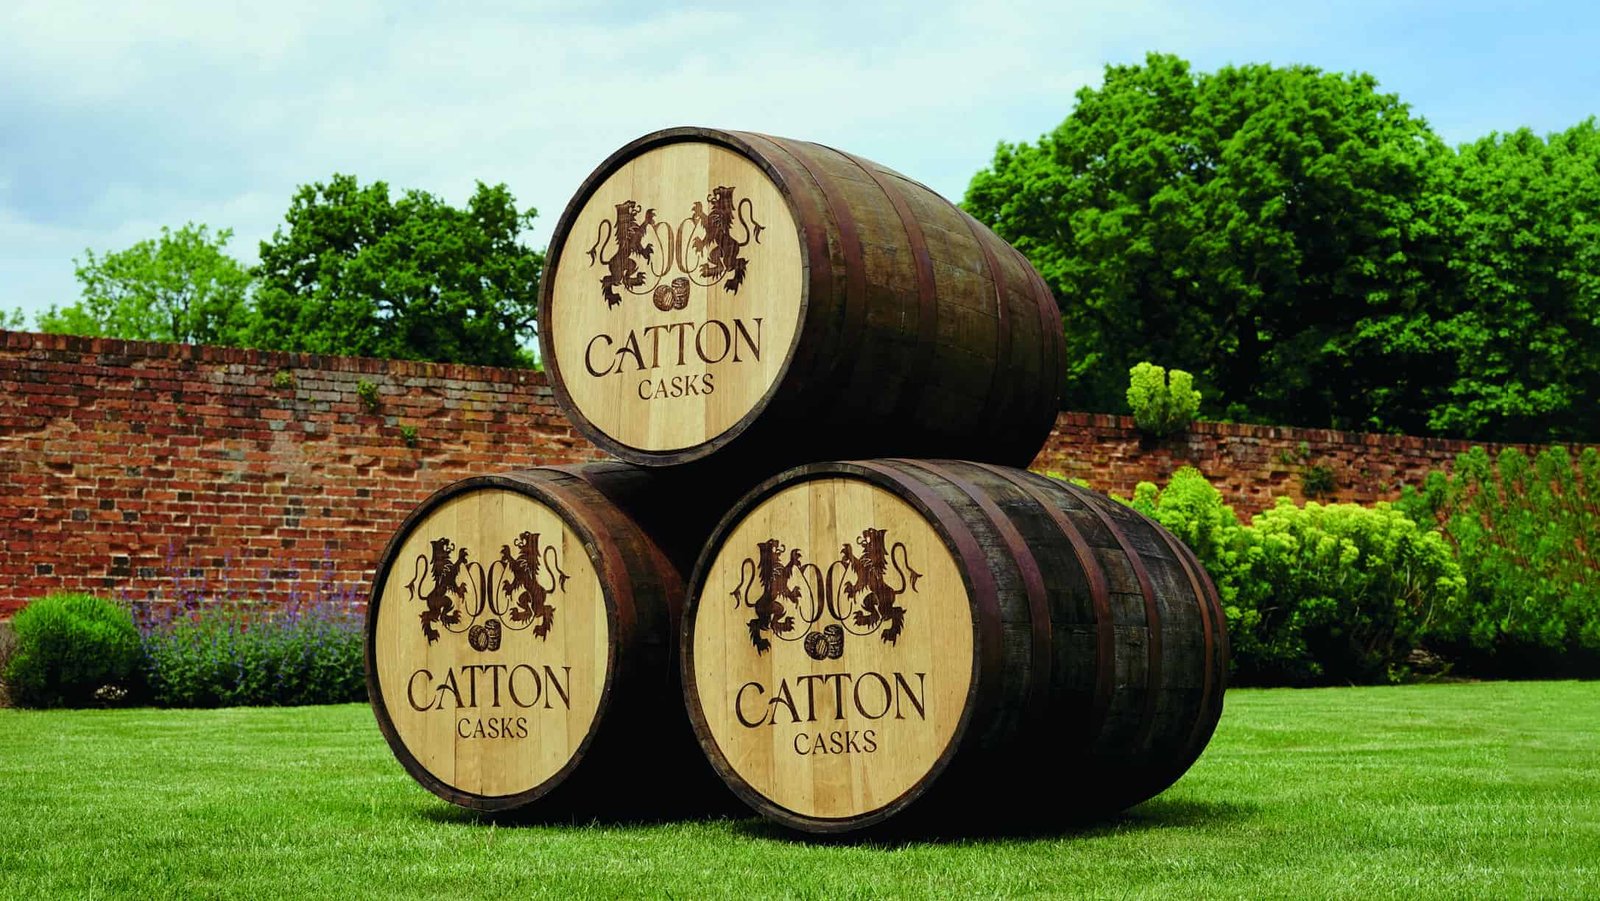 Three wooden barrels stacked on top of each other in front of a brick wall.